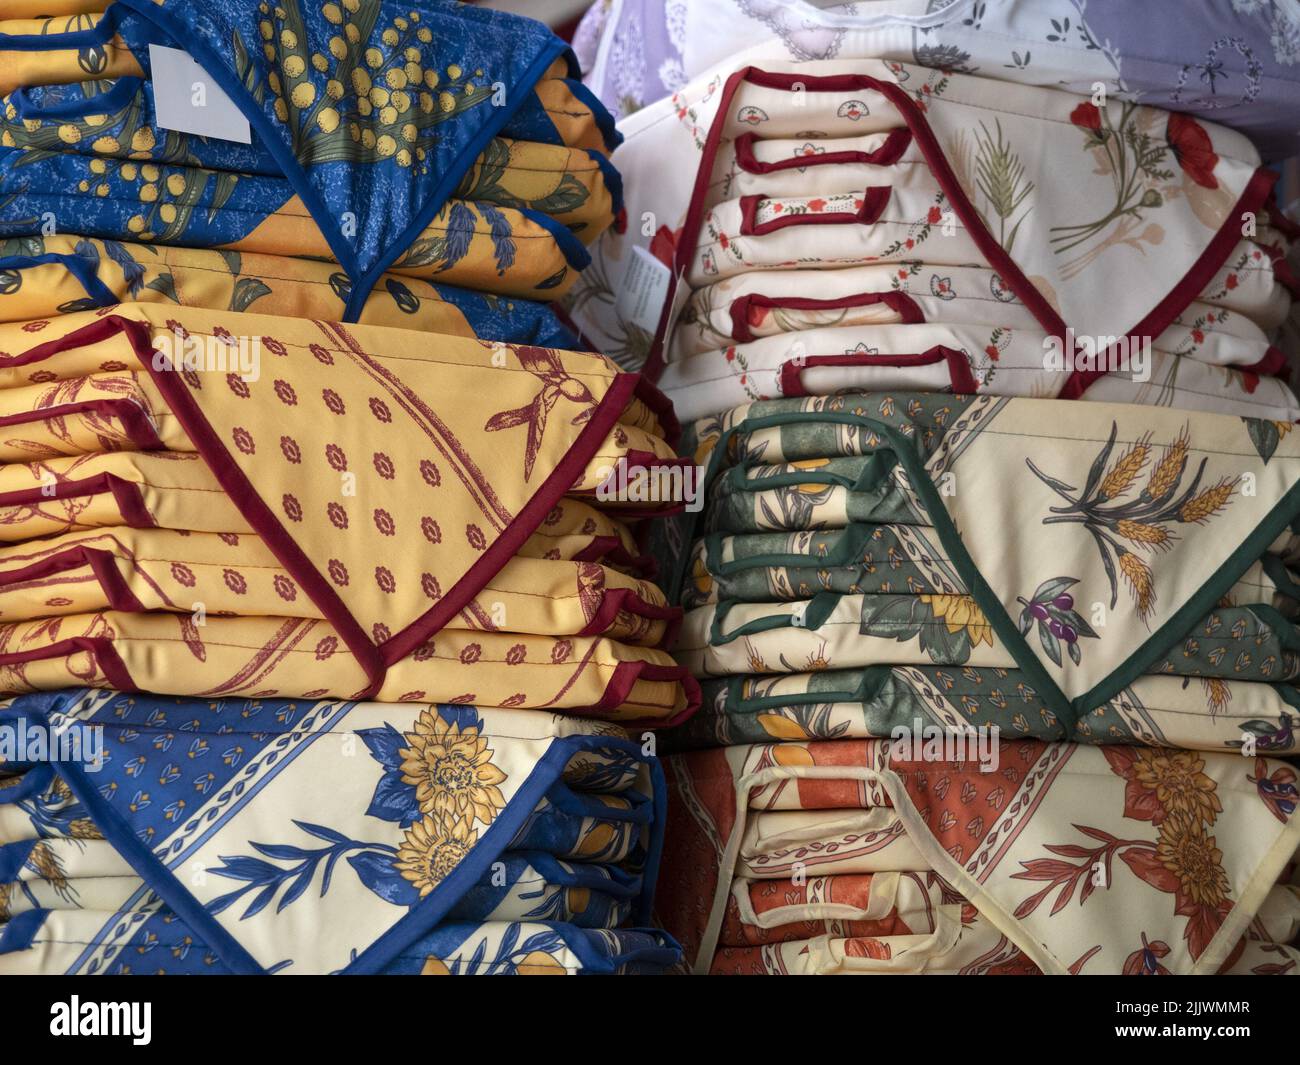 provence france fabric provencal detail at the market Stock Photo